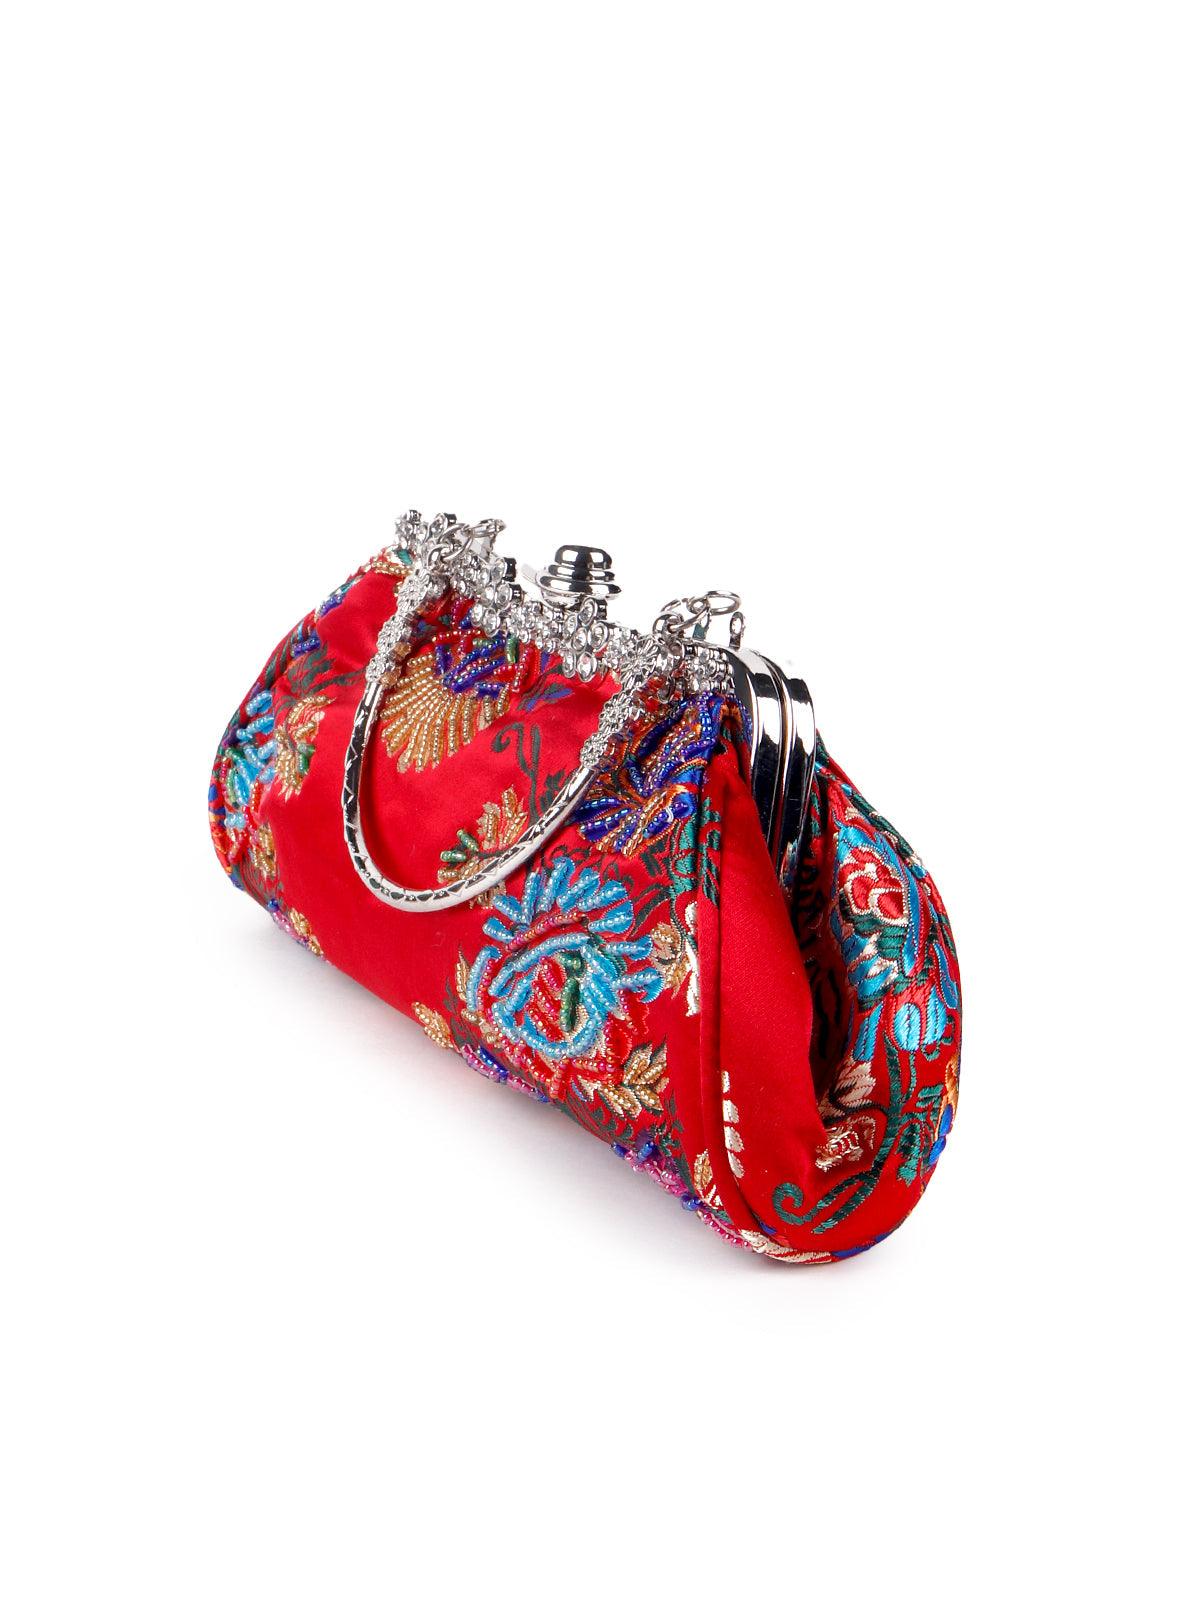 Vibrant red embroidered hand clutch - Odette